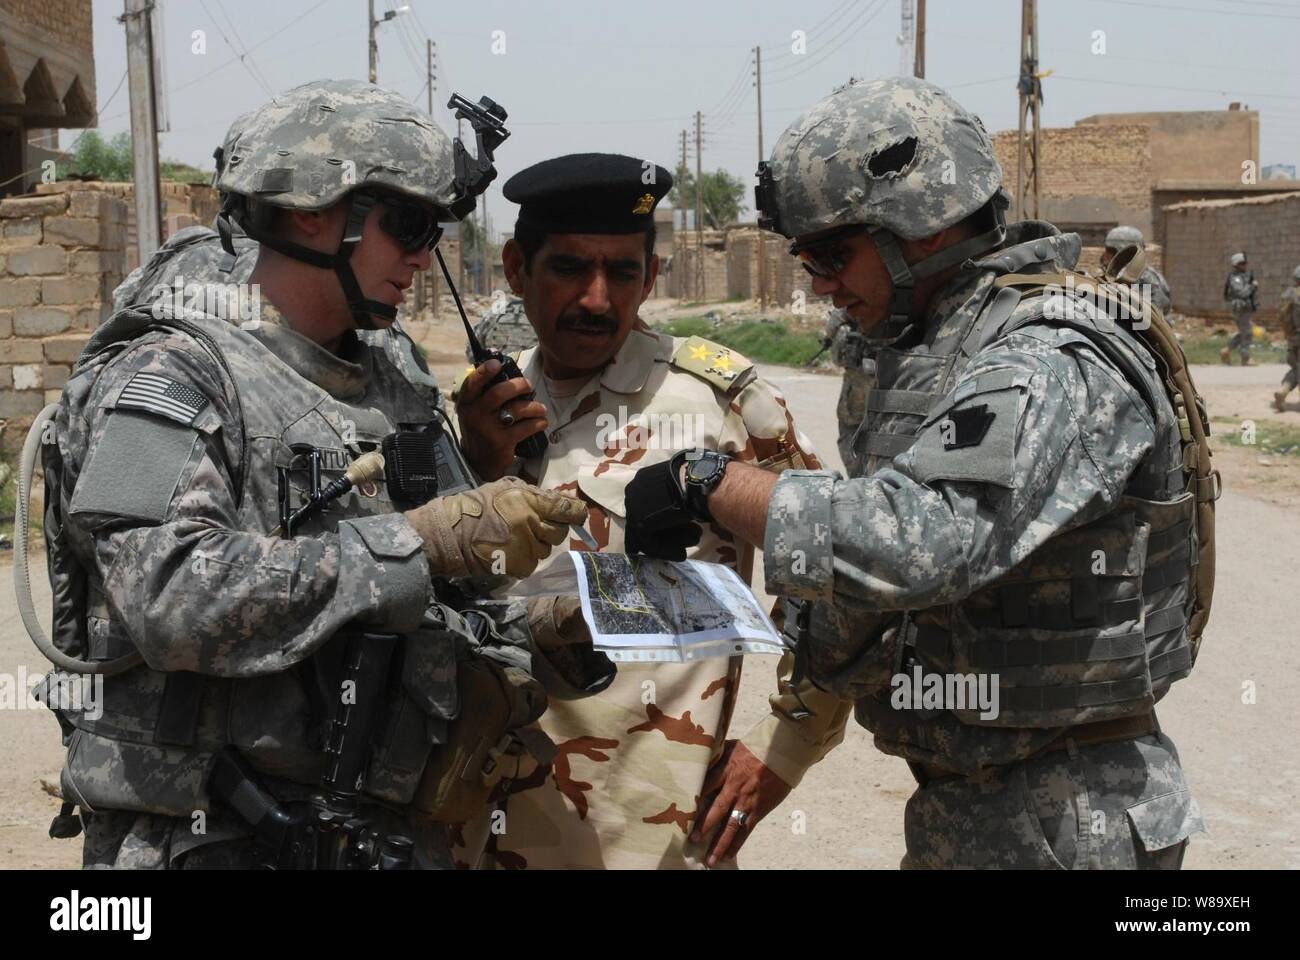 U.S. Army 1st Lt. Fredrick Santucci, attached to 2nd Brigade, 1st Infantry Division, and an Iraqi army officer plan a patrol route through the city of Abu Ghraib, Nassir Wa Salam province, Iraq, on May 17, 2009. Stock Photo